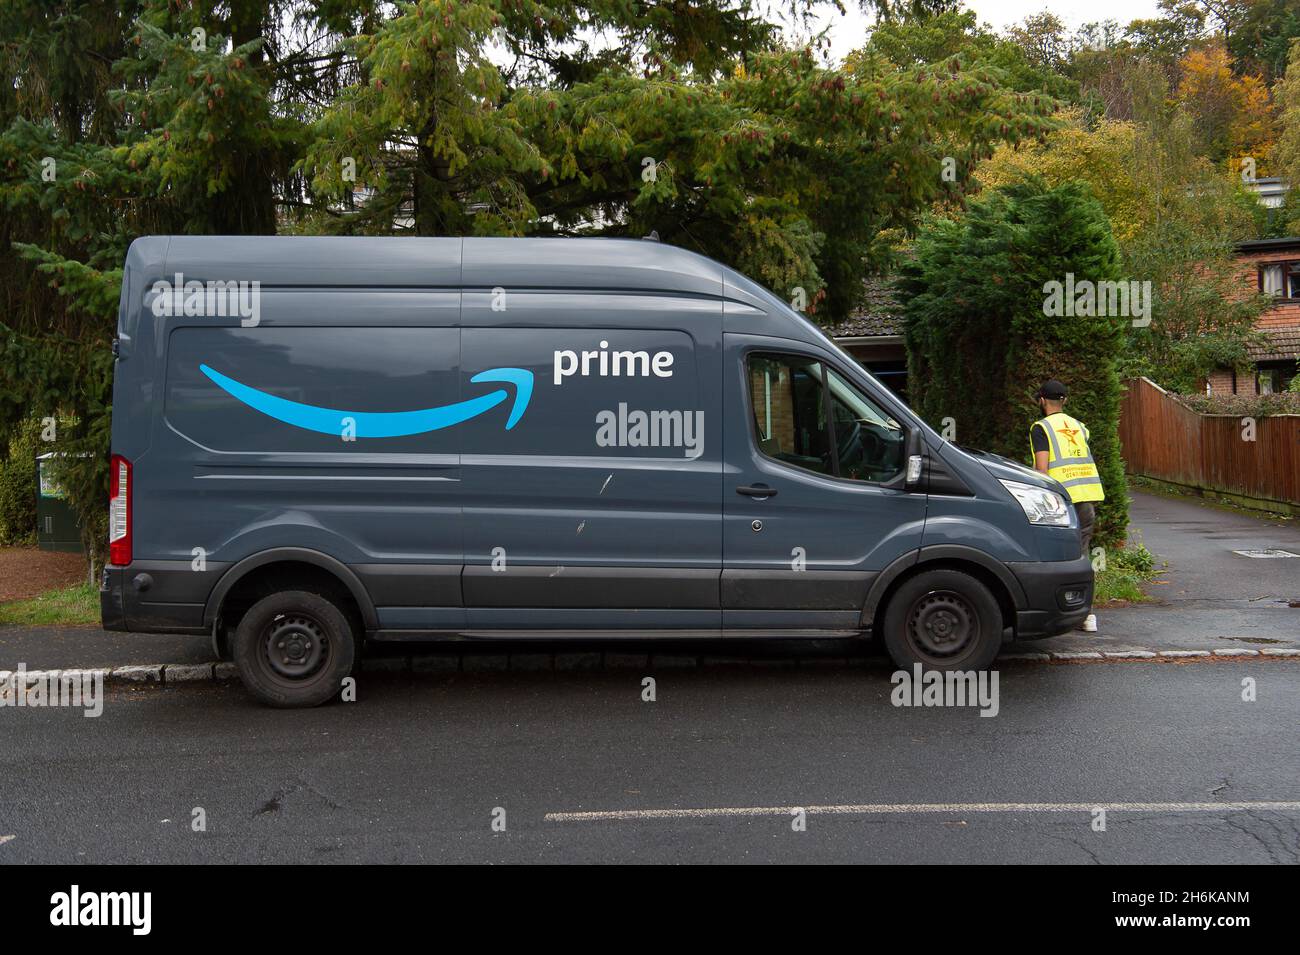 Amazon Transit Van High Resolution Stock Photography and Images - Alamy